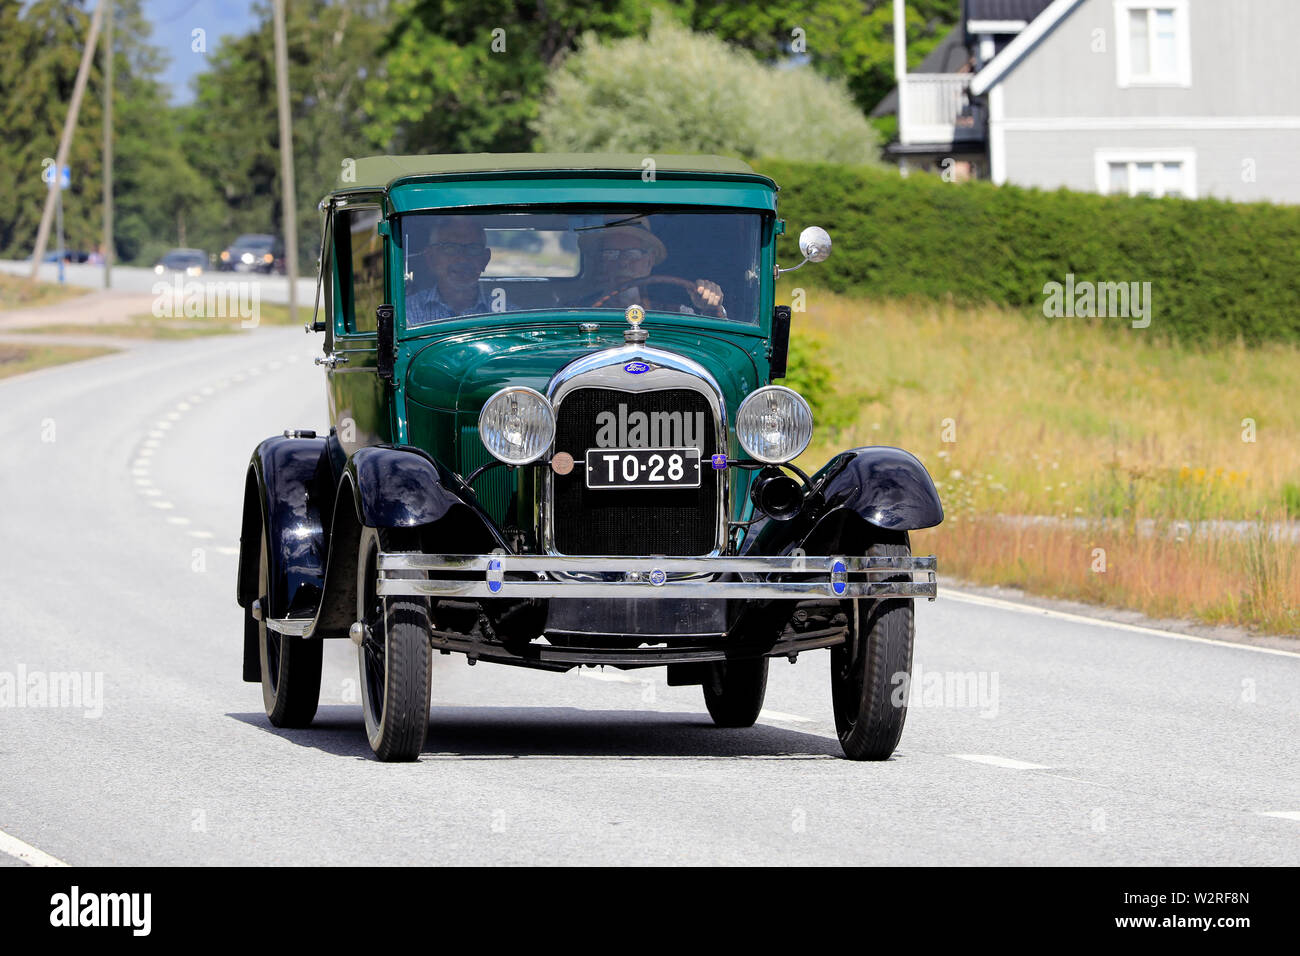 Finland. July 6, 2019. Kimito Tractorkavalkad 2019, vintage tractor parade featured also antique cars, here green Ford Model A on the road. Stock Photo